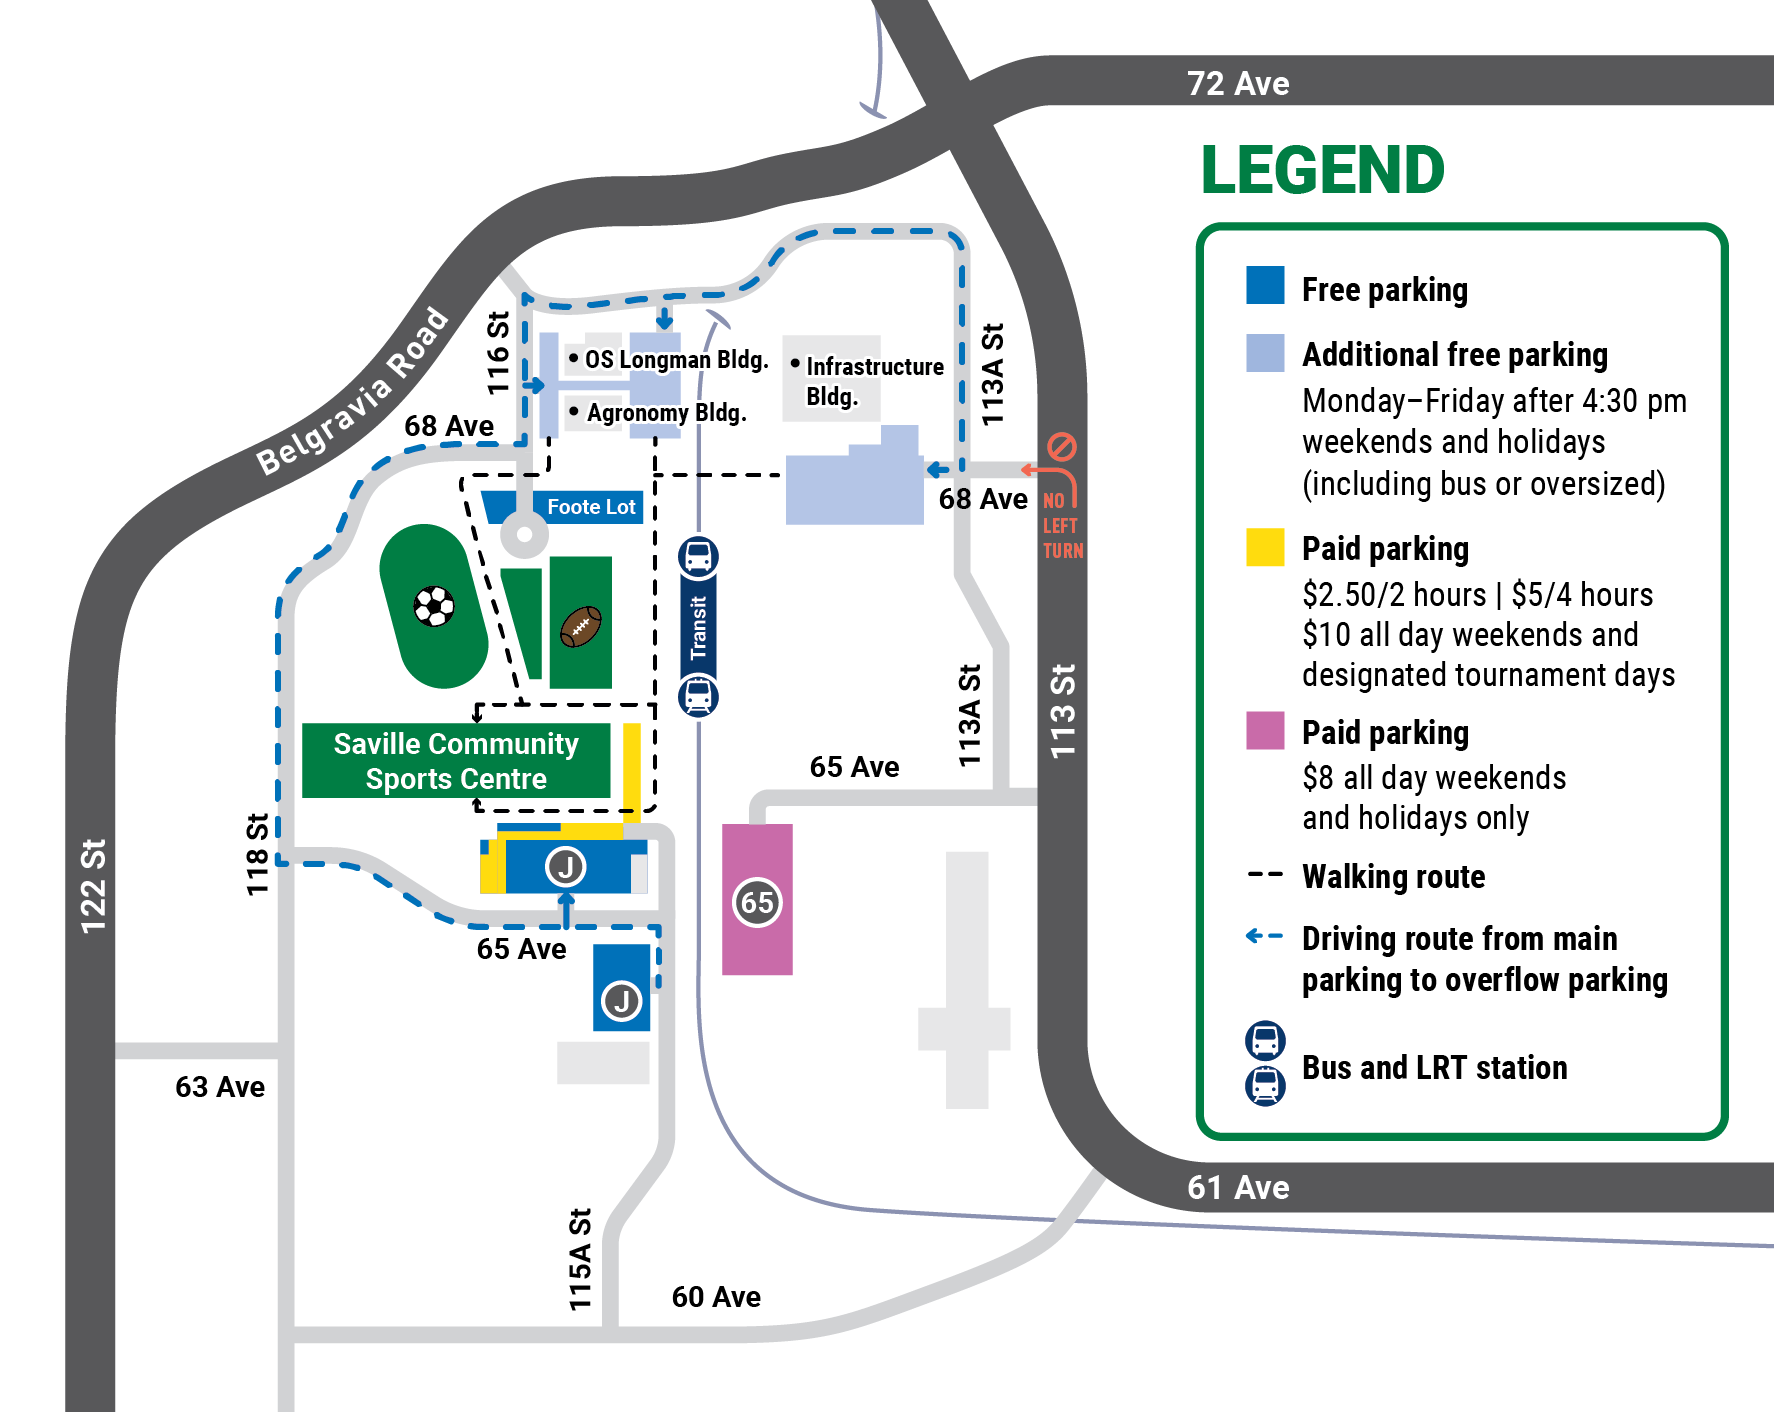 South Campus parking map